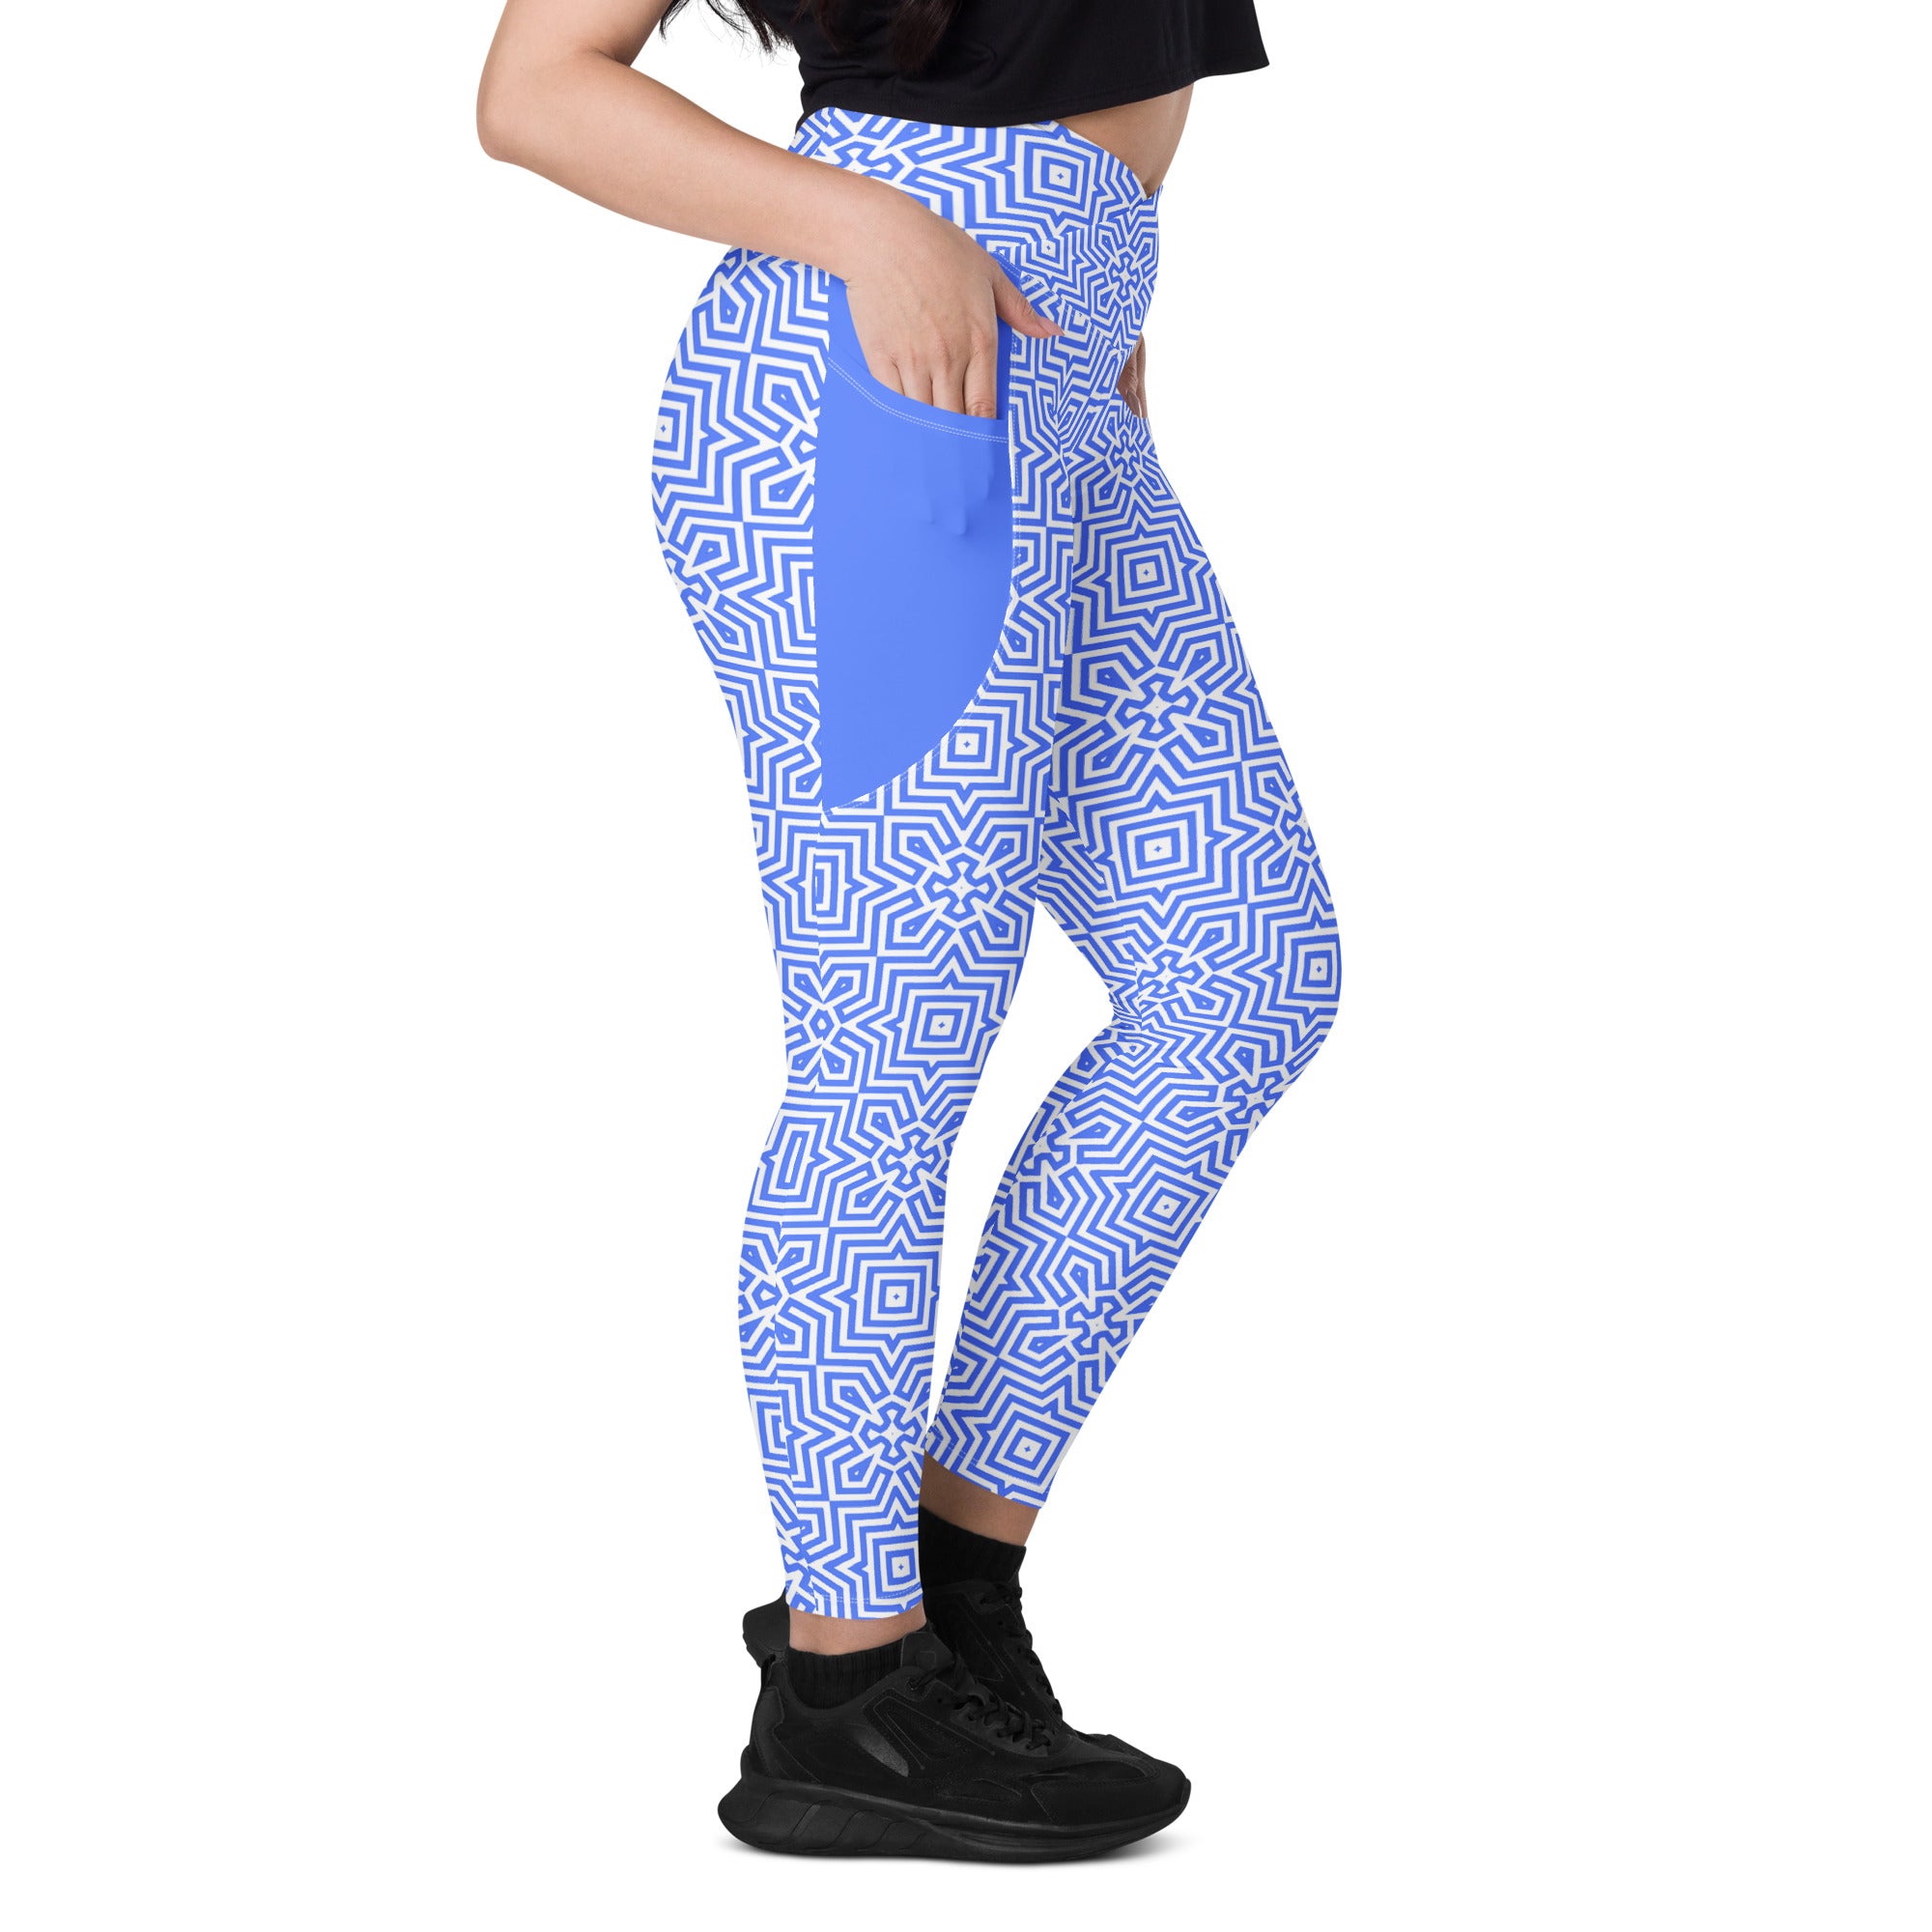 Stylish and functional chevron leggings with crossover feature and pockets.